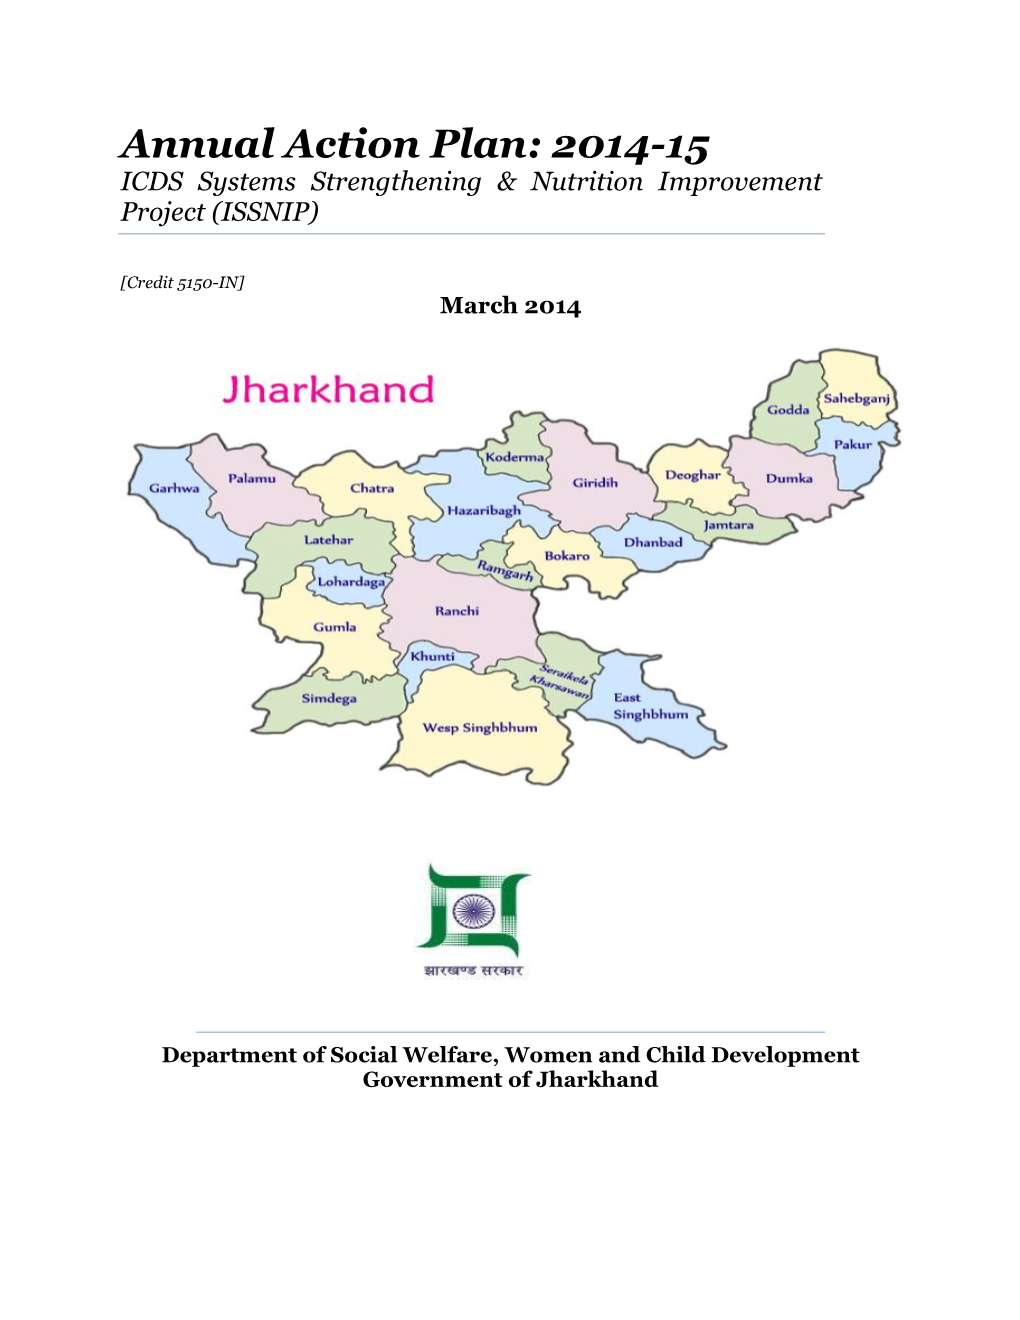 Annual Action Plan: 2014-15 ICDS Systems Strengthening & Nutrition Improvement Project (ISSNIP)